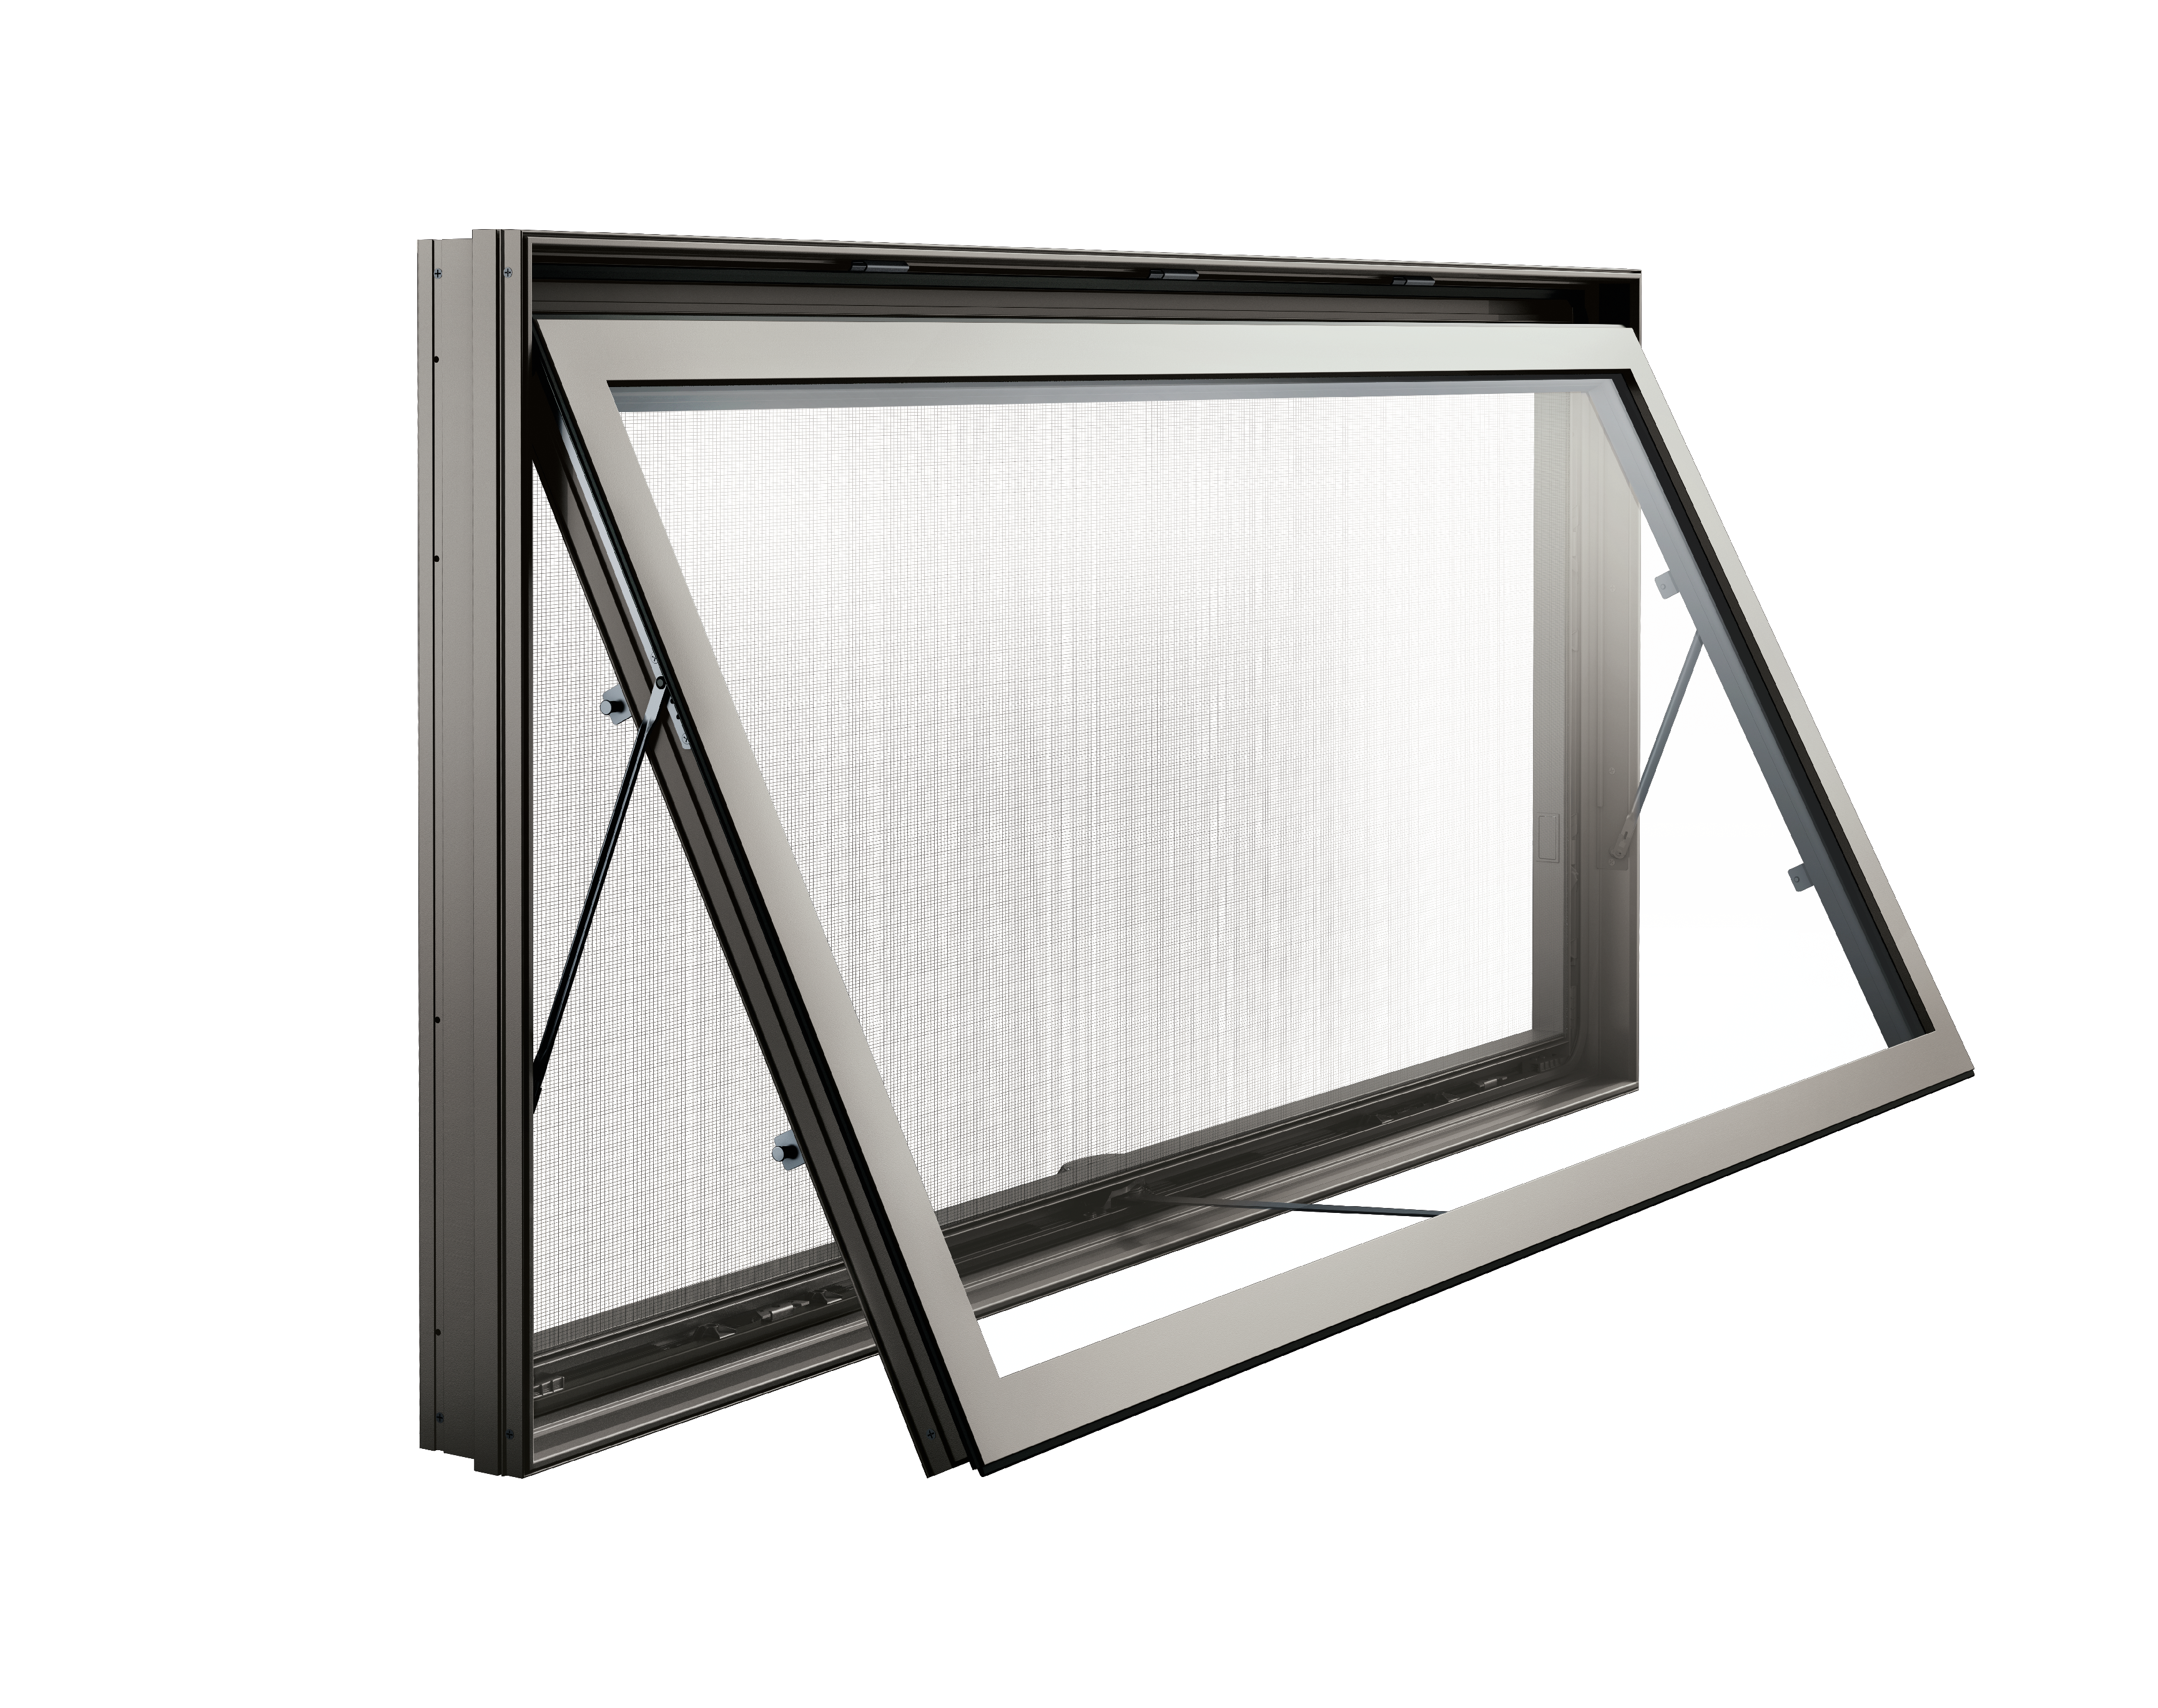 Marvin modern awning windows with thermal performance